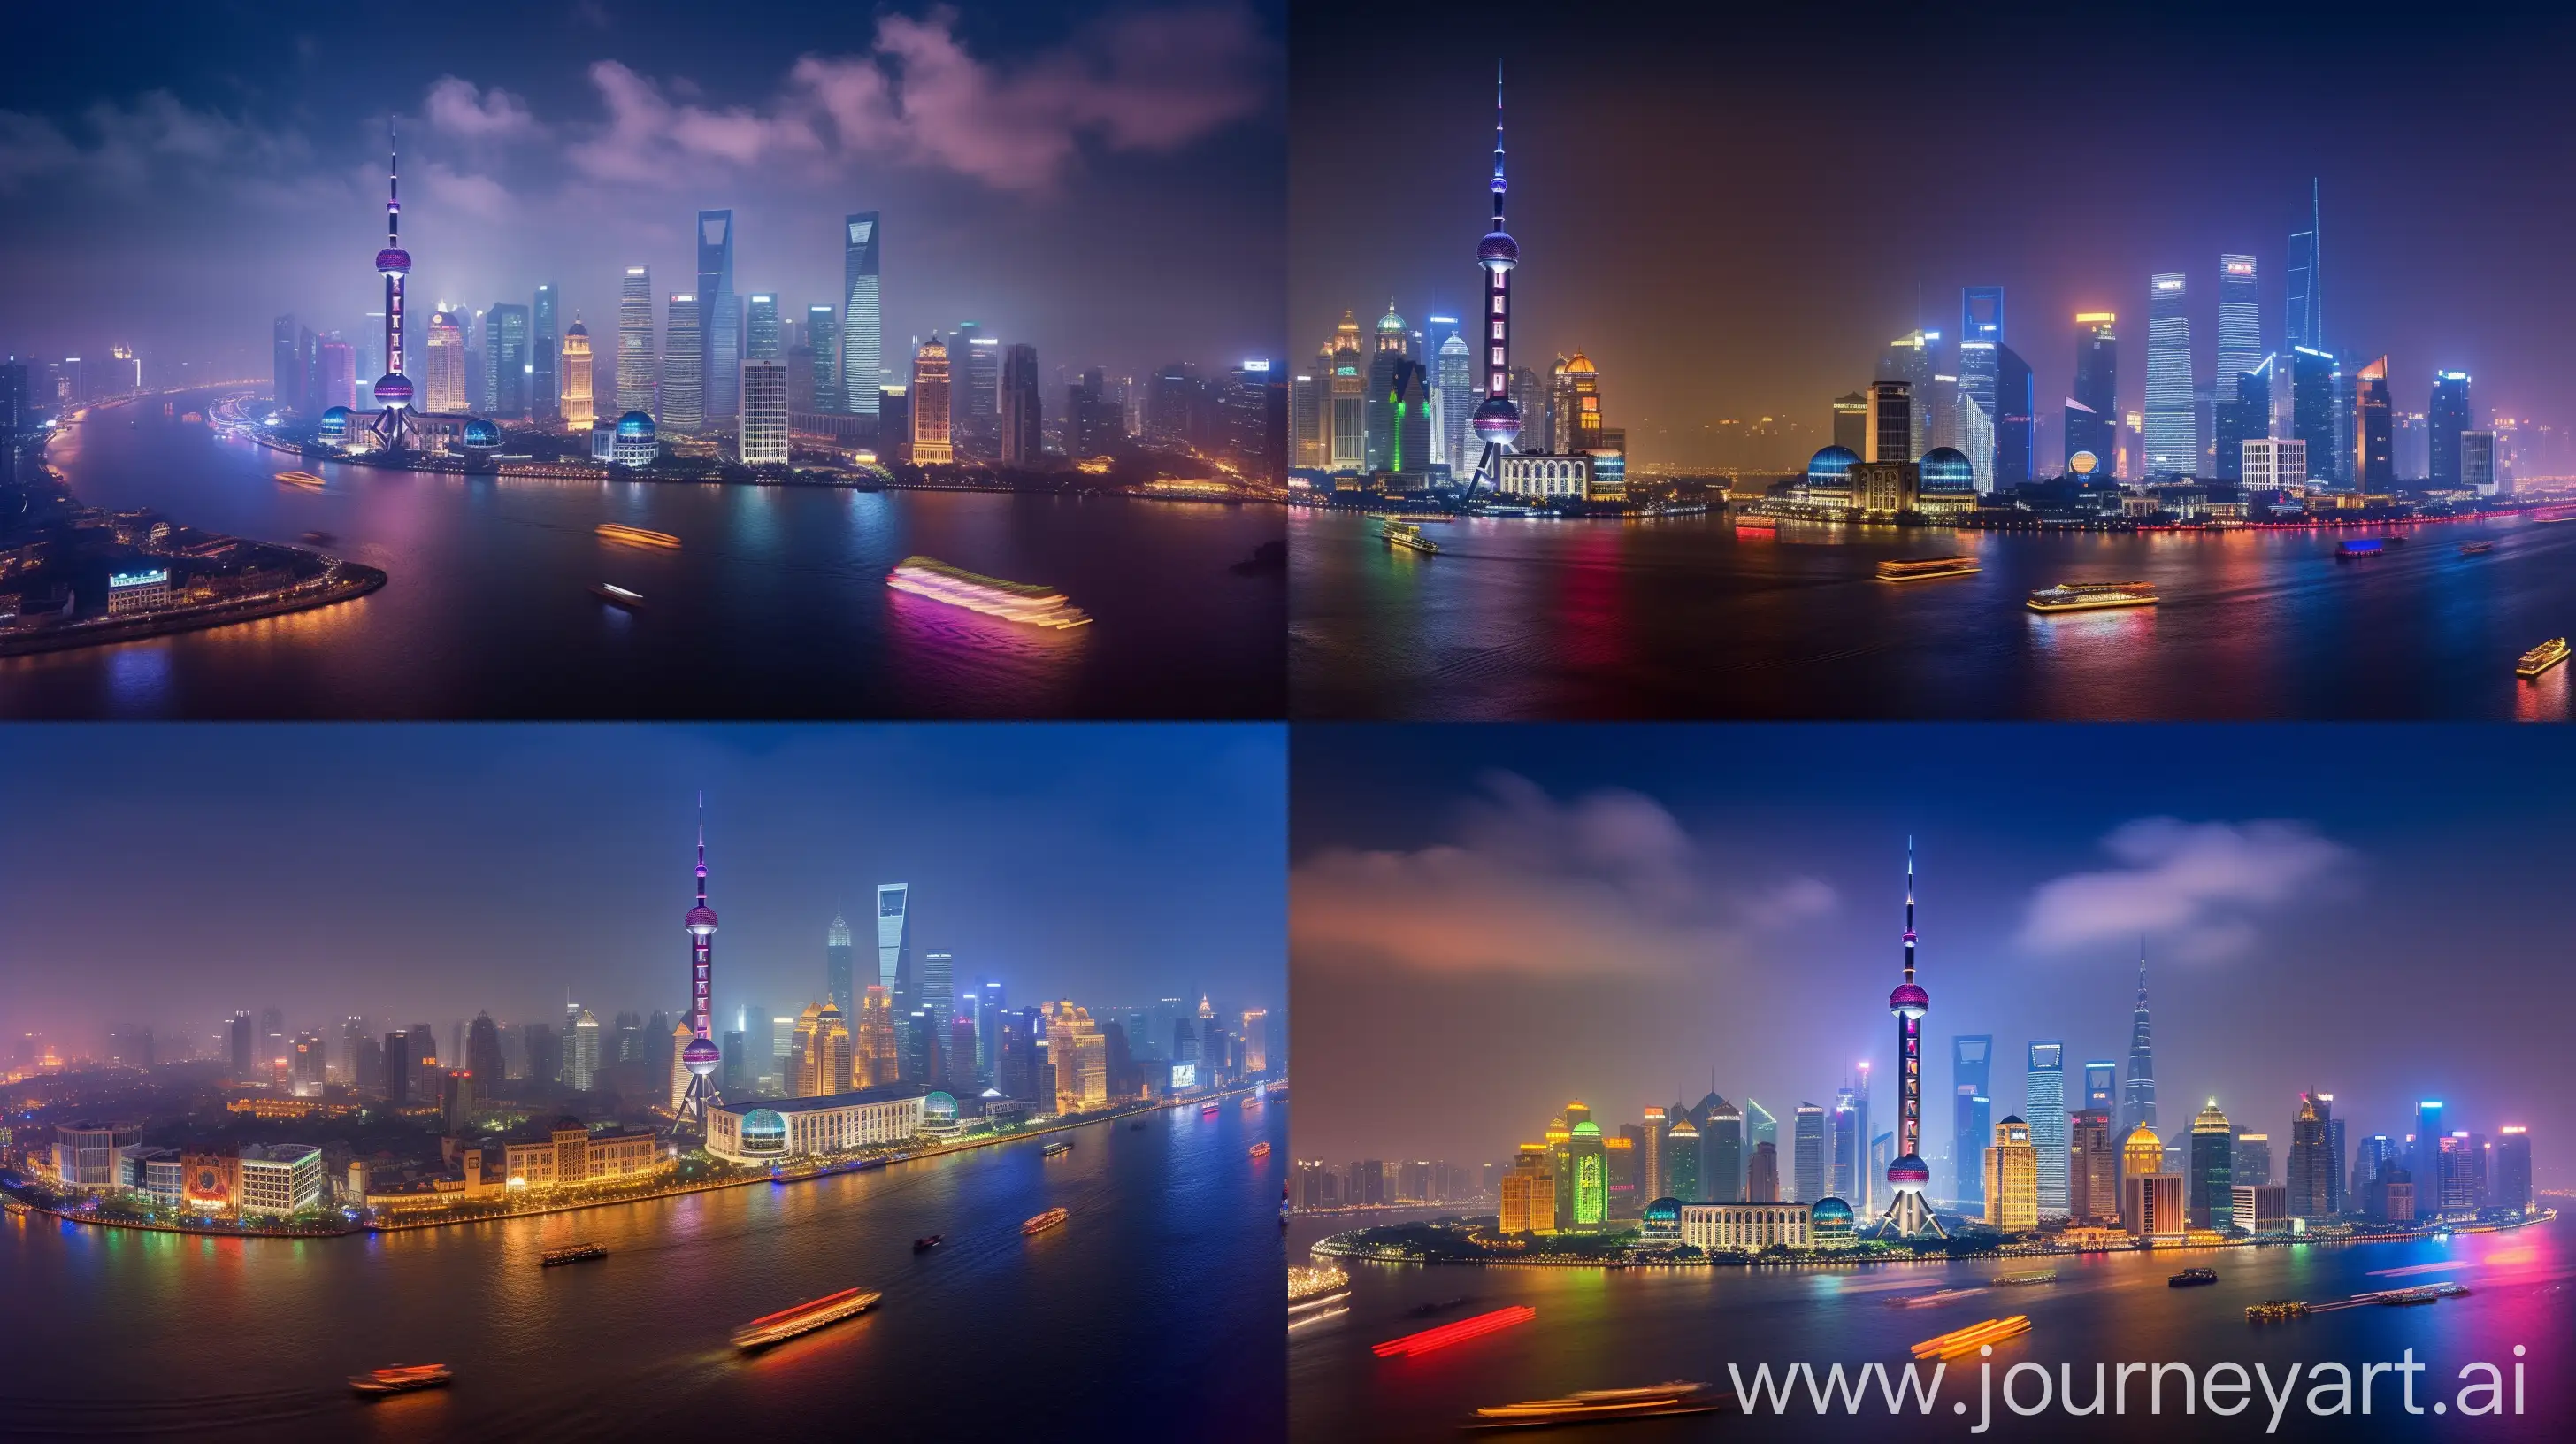 Bund-Night-Scene-Surreal-Dusk-Painting-of-Vibrant-City-Lights-and-Tranquil-River